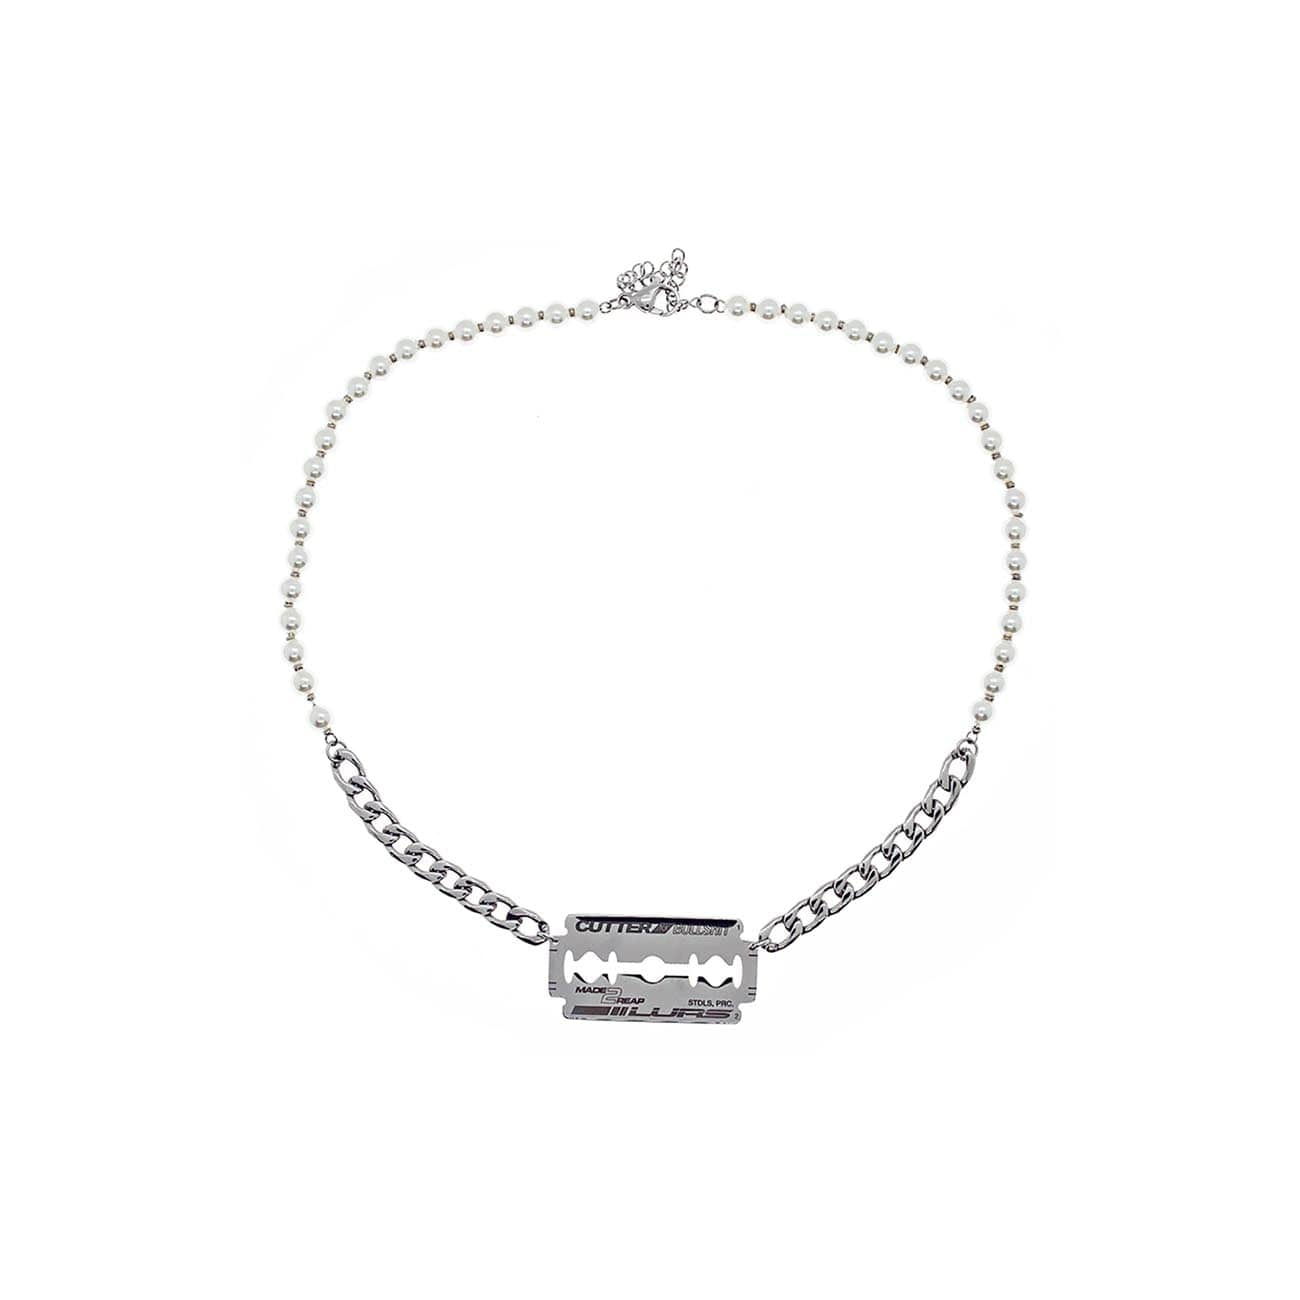 LURS Pearls & Shaving Blade Necklace - PROJECTISR US